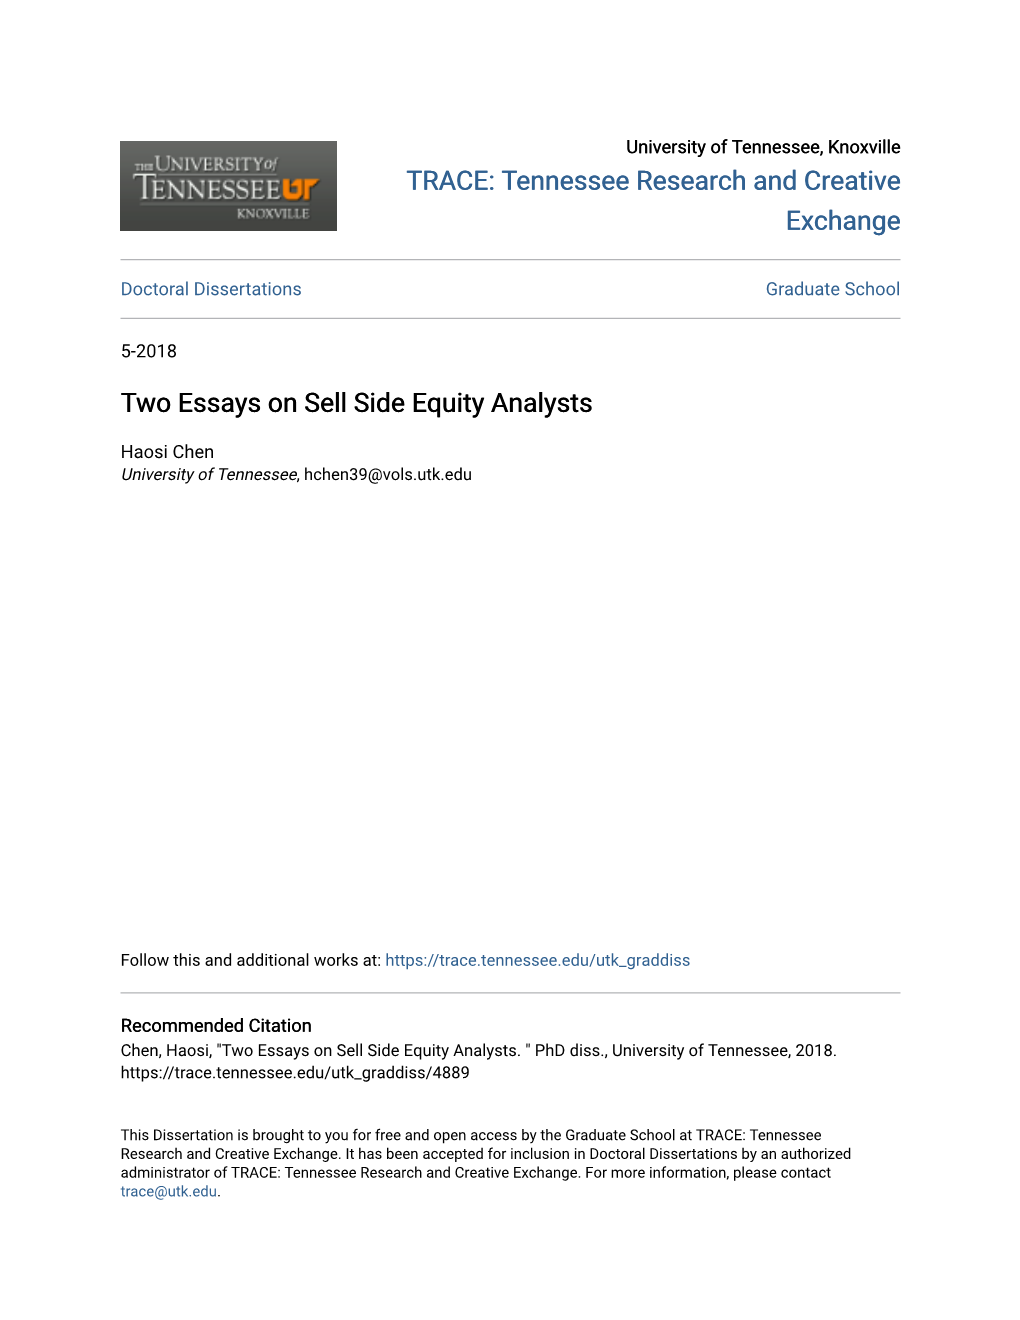 Two Essays on Sell Side Equity Analysts